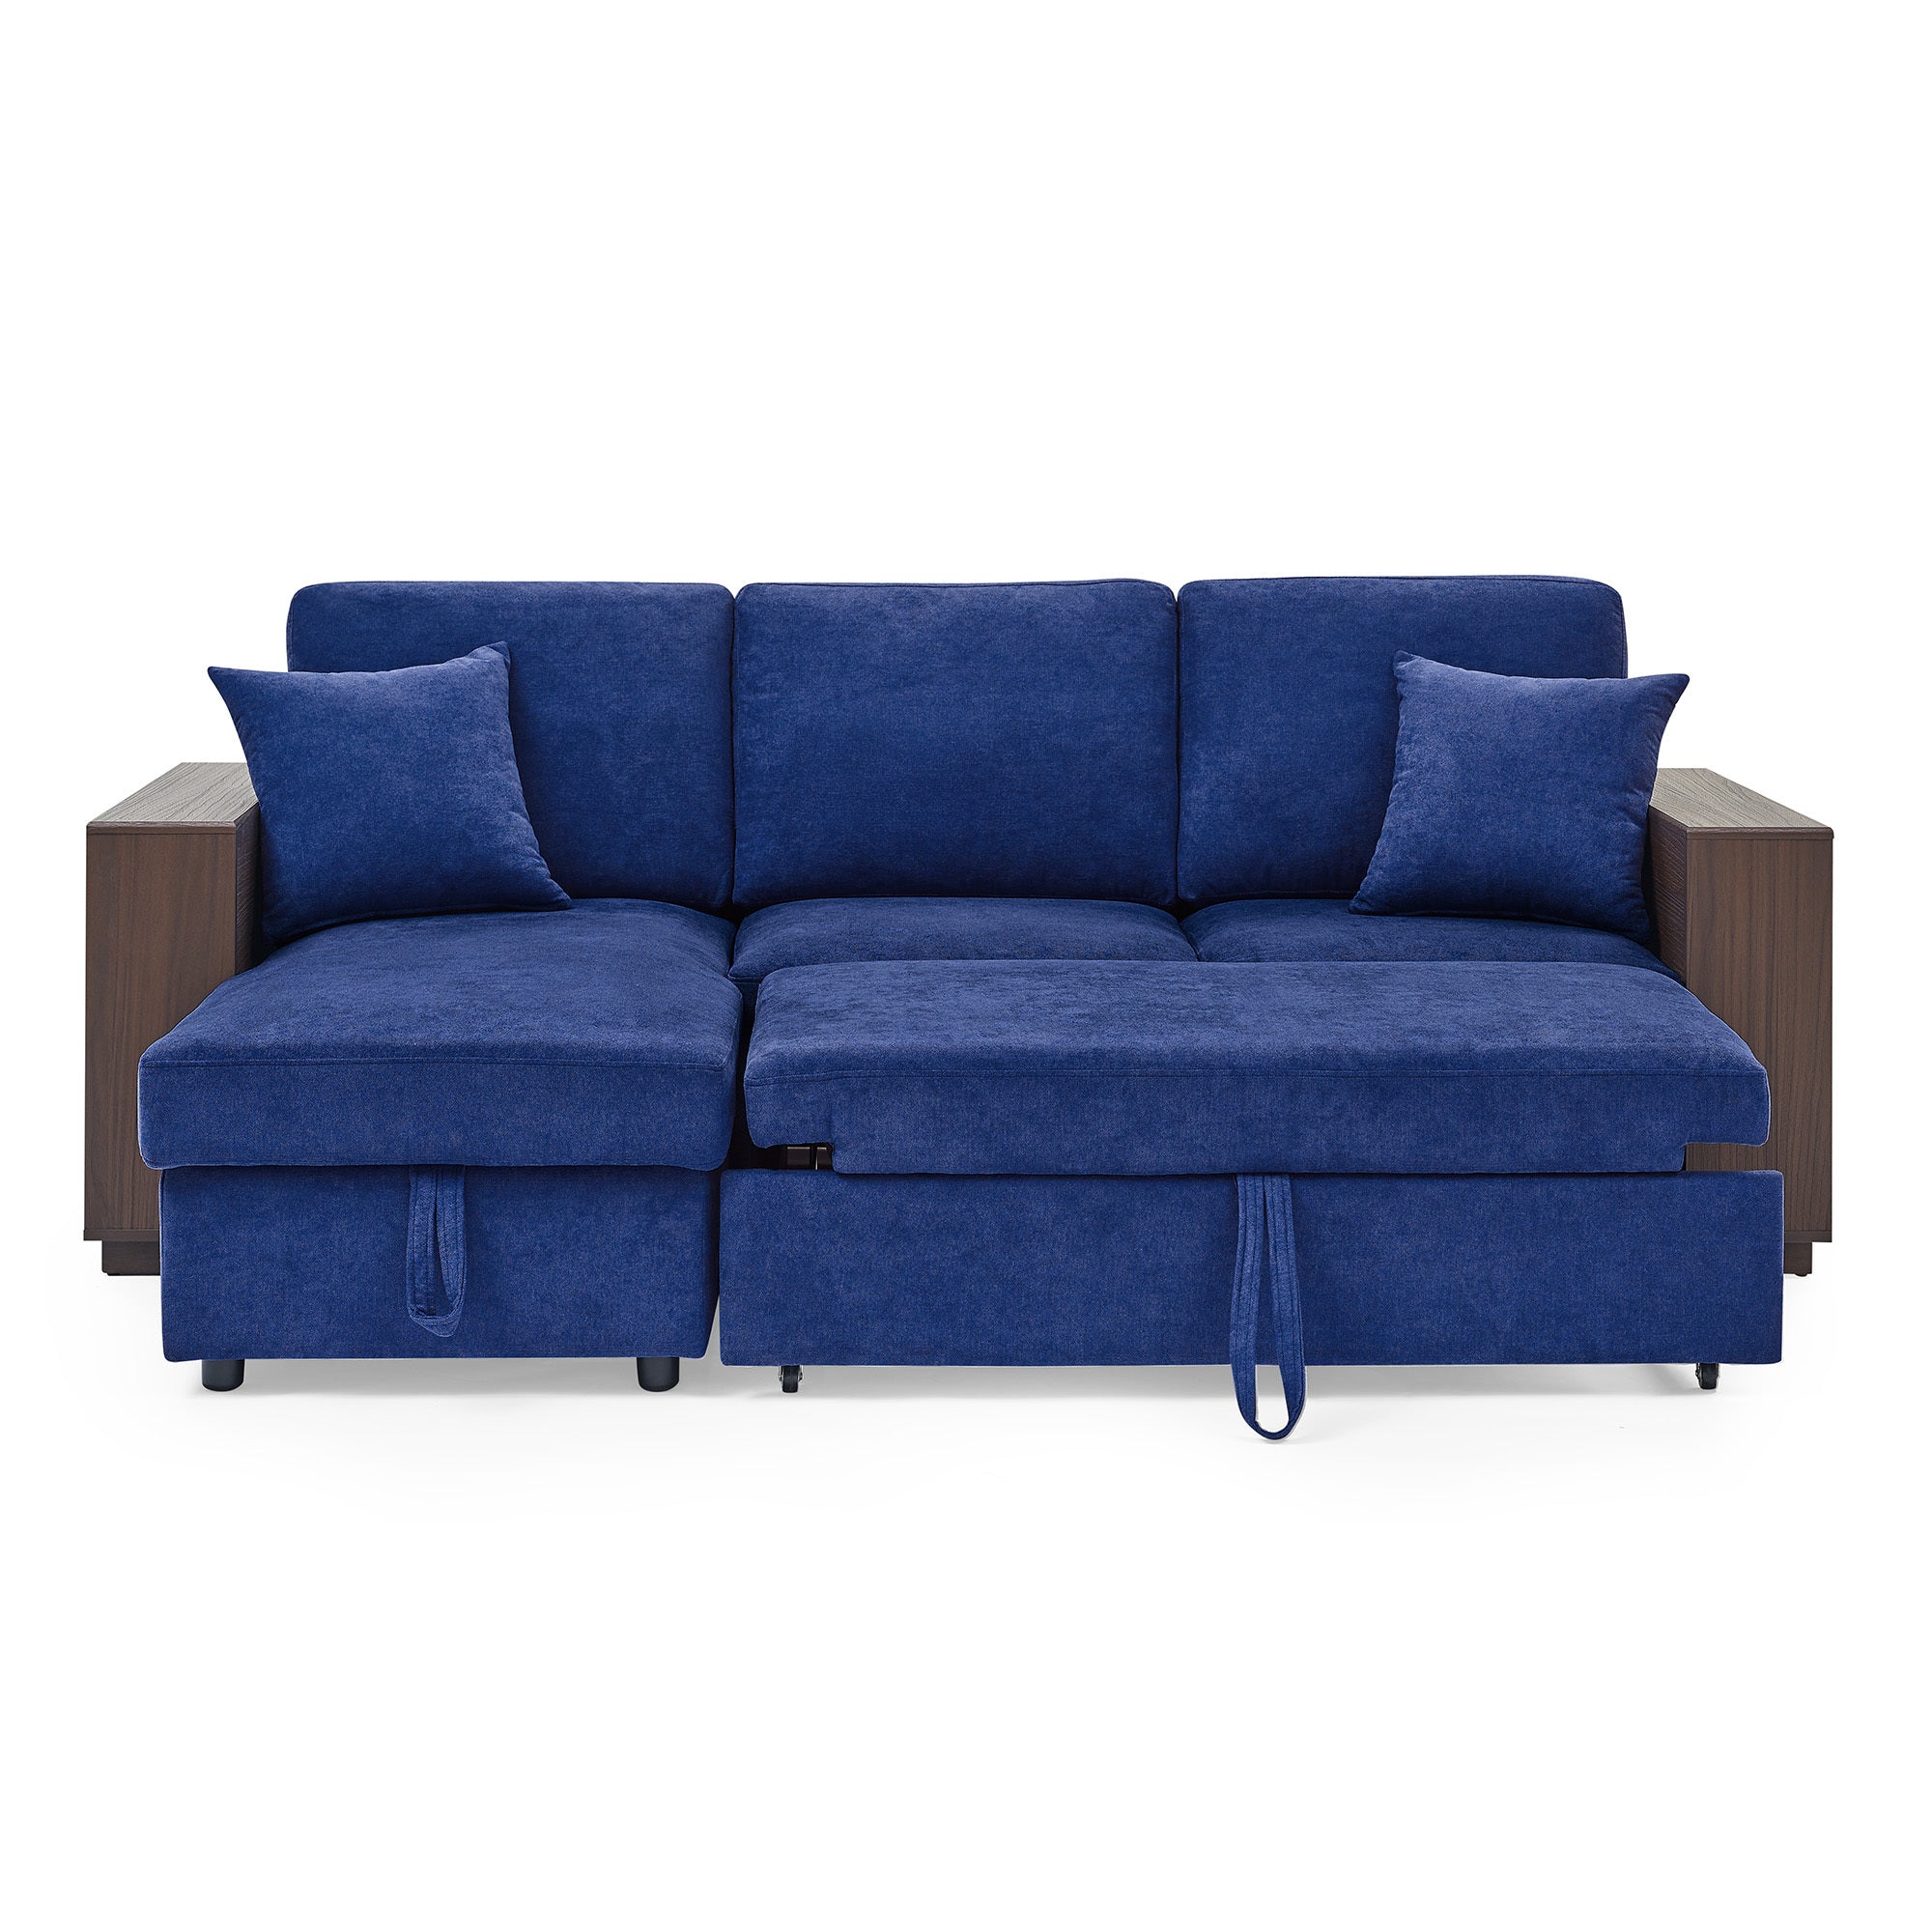 MAICOSY 88" Sleeper Sofa and Reversible Chaise Storage & Two Pillows, Navy Blue